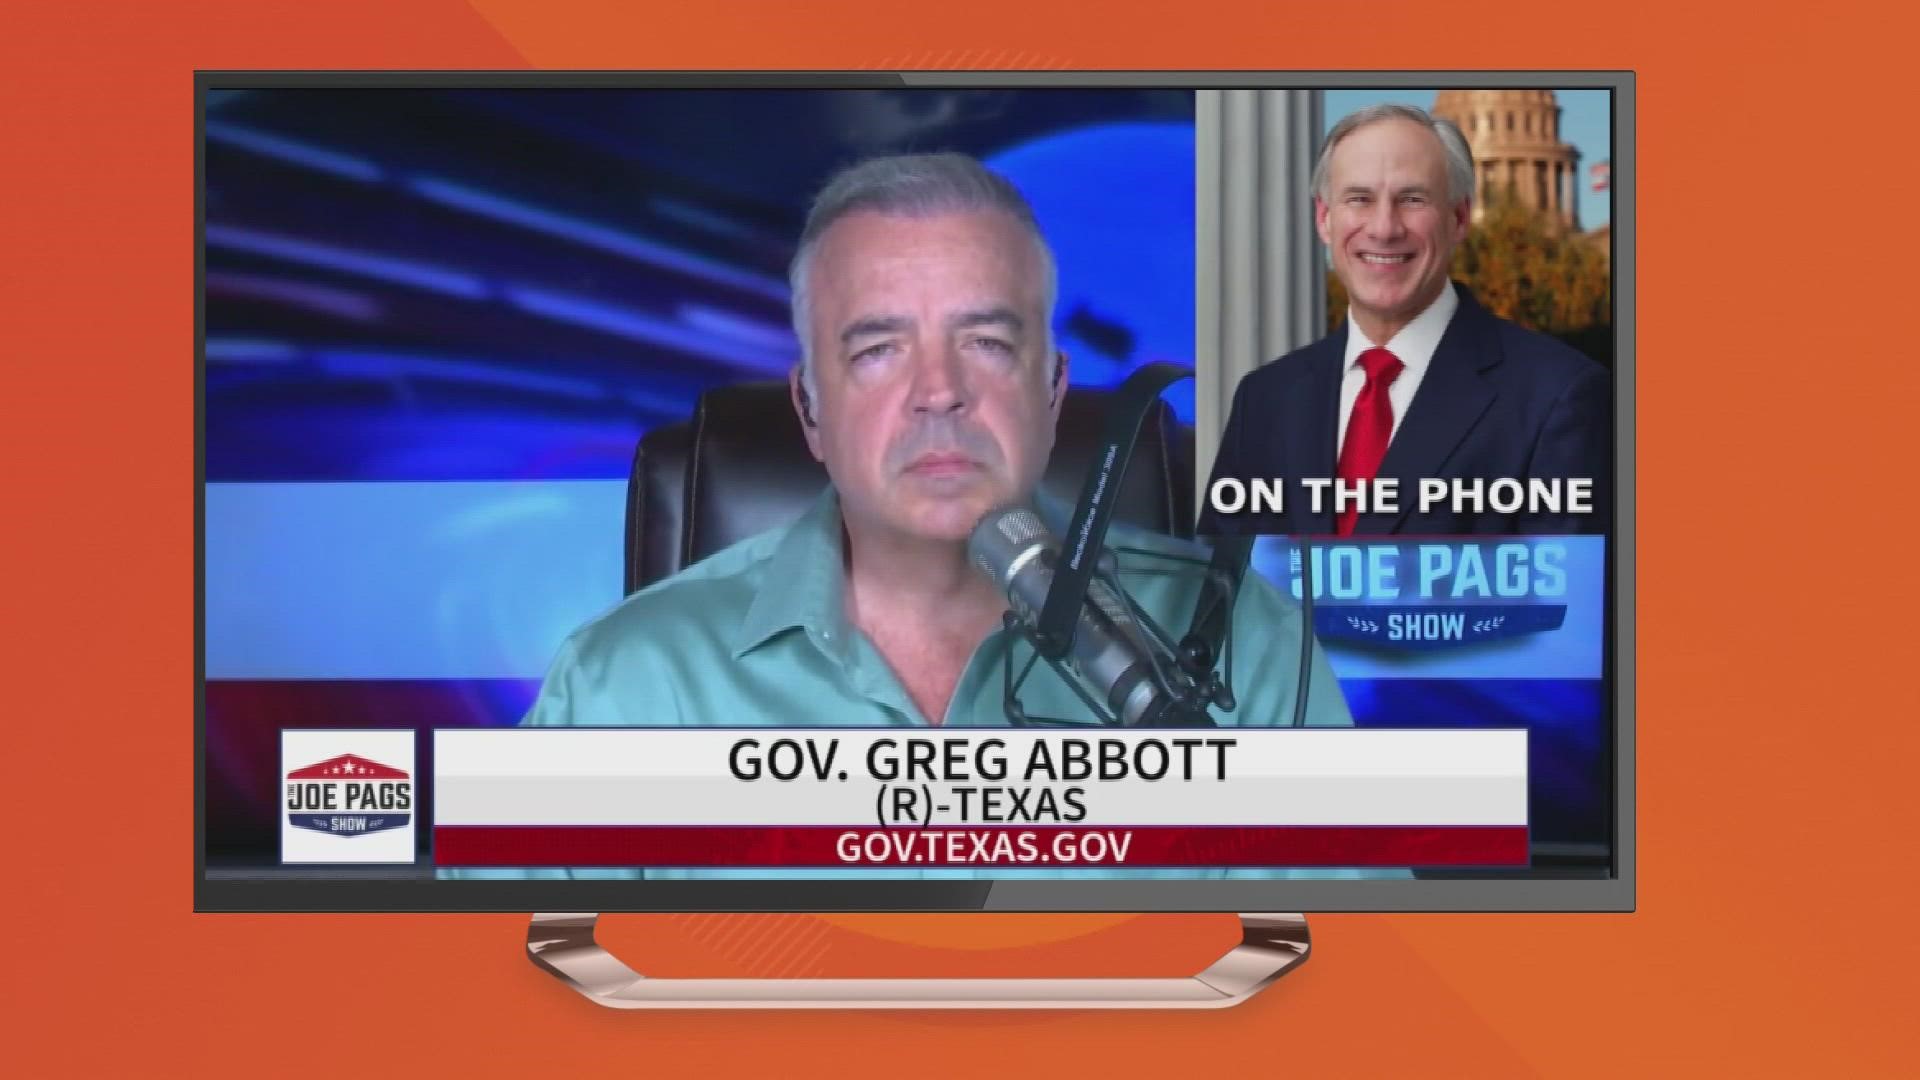 During a phone call on a conservative talk radio show, Gov. Abbott said Texas may "resurrect" the legal challenge to fund public education for all children.